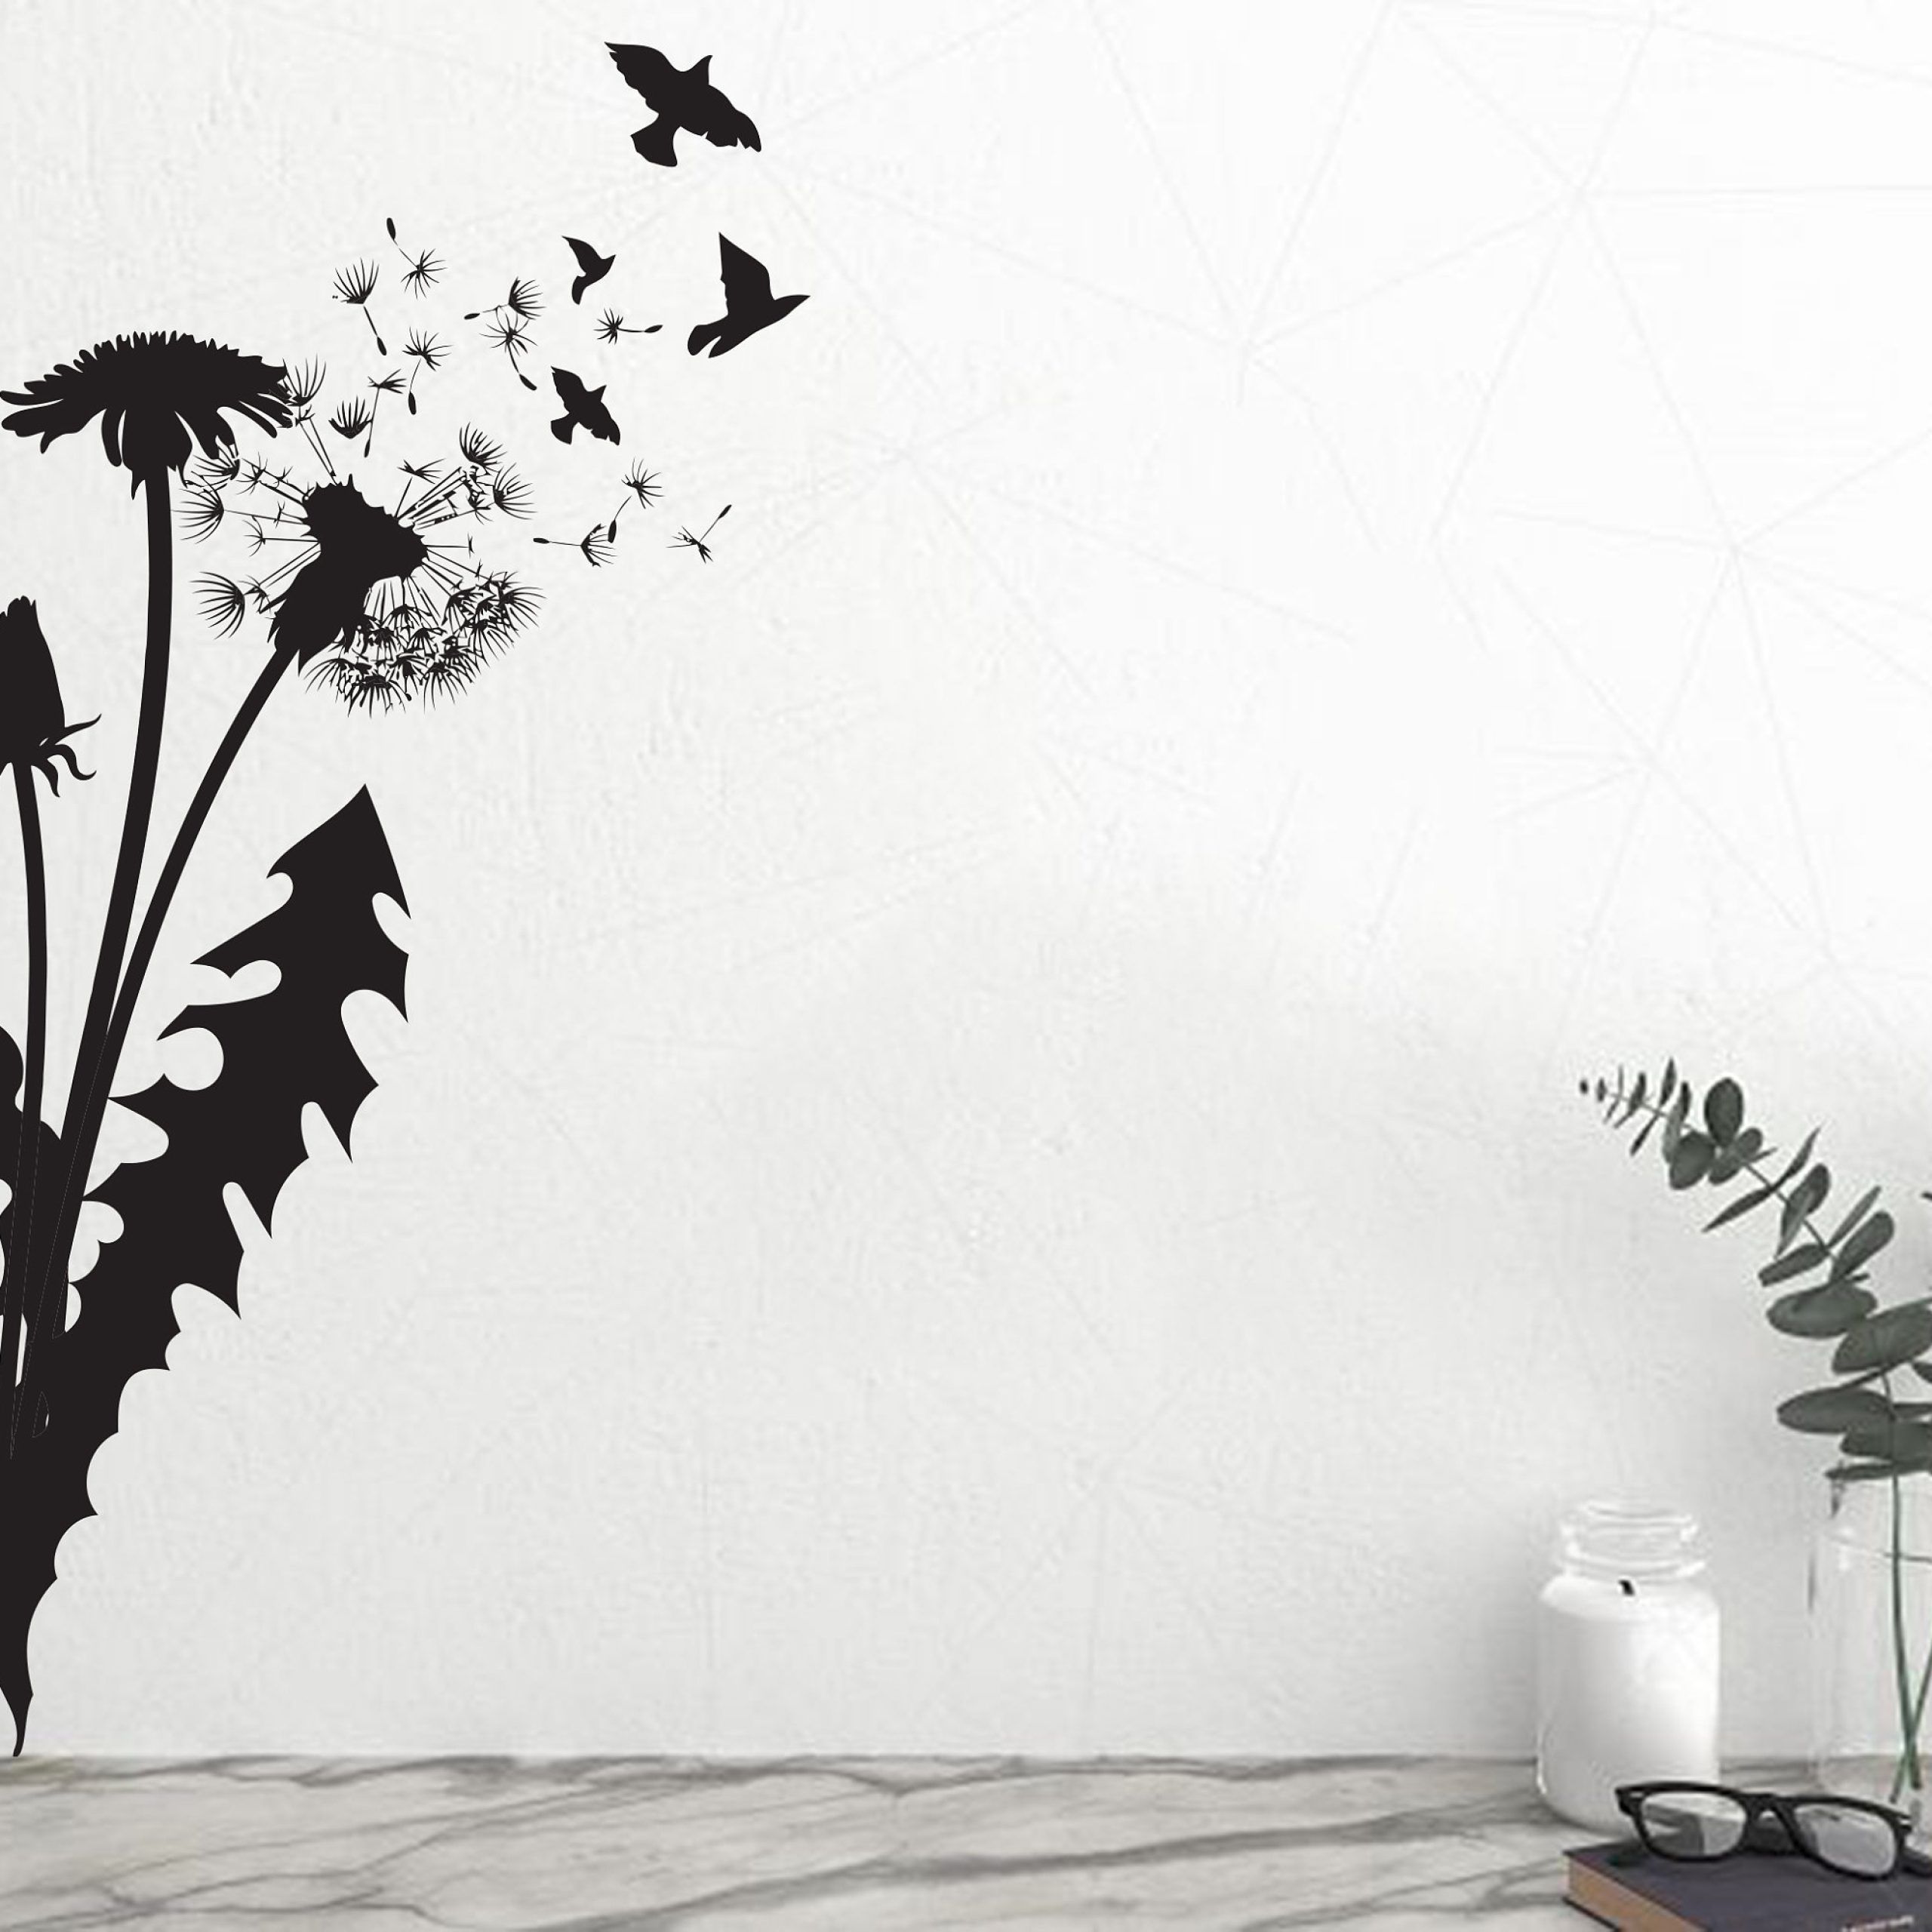 Dandelion And Flying Birds Wall Art Decor Dandelion Wall Decal – Etsy  Ireland Within Flying Dandelion Wall Art (View 8 of 15)